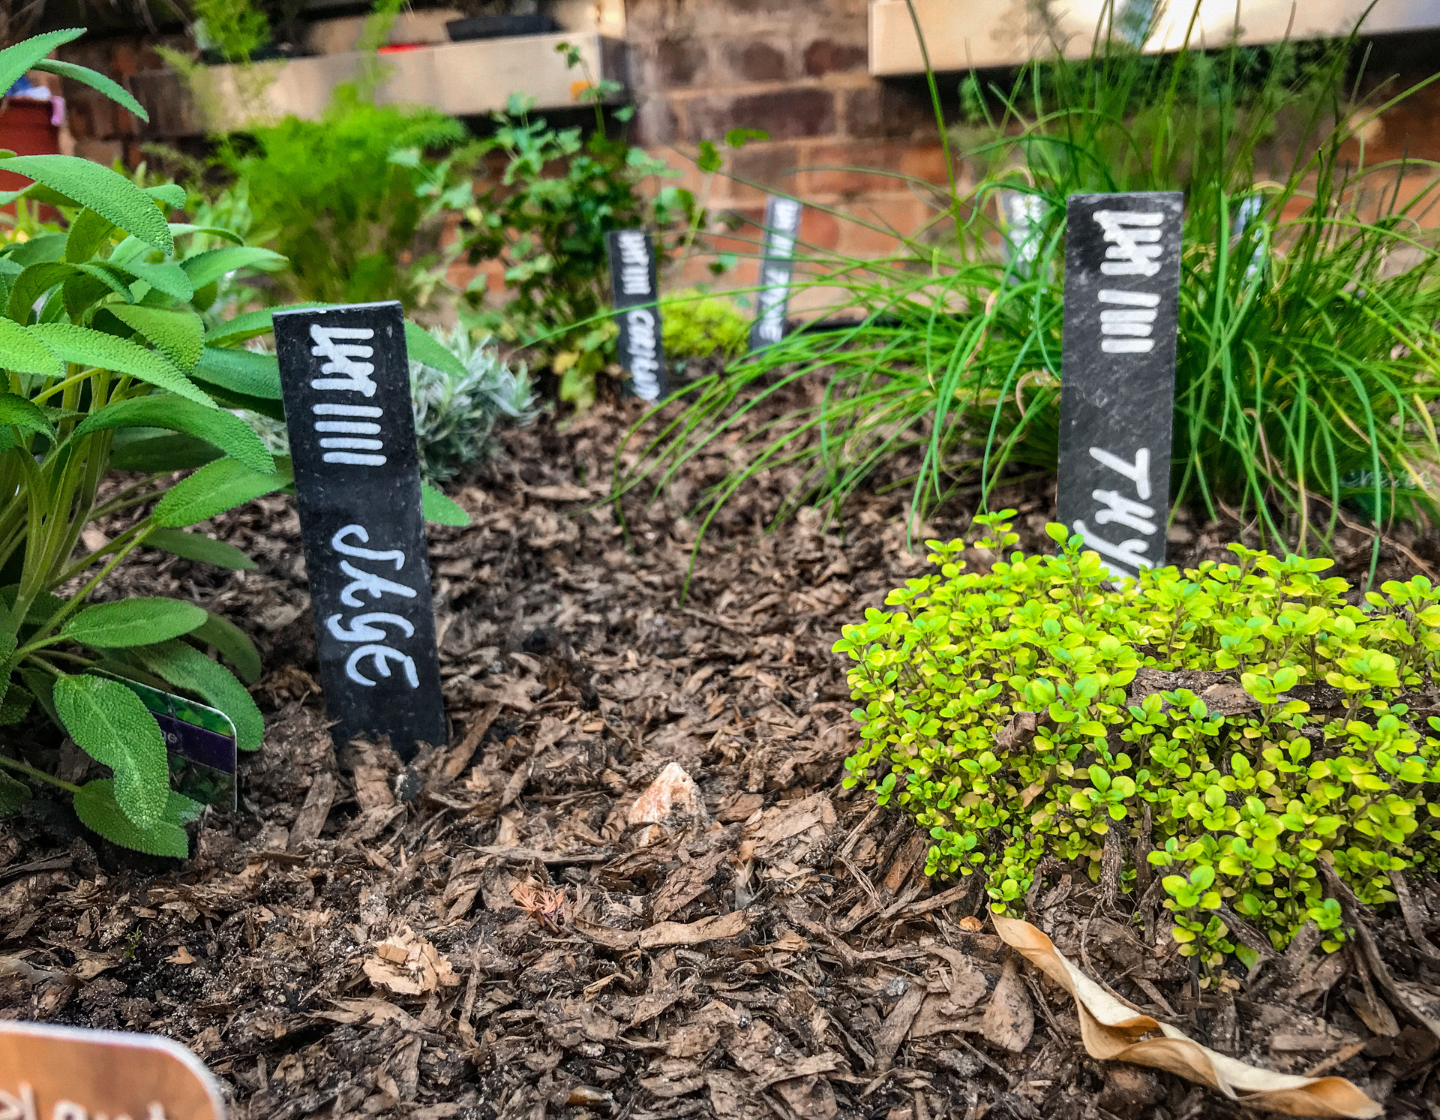 Close up of herb garden with growing plants and chalk labels